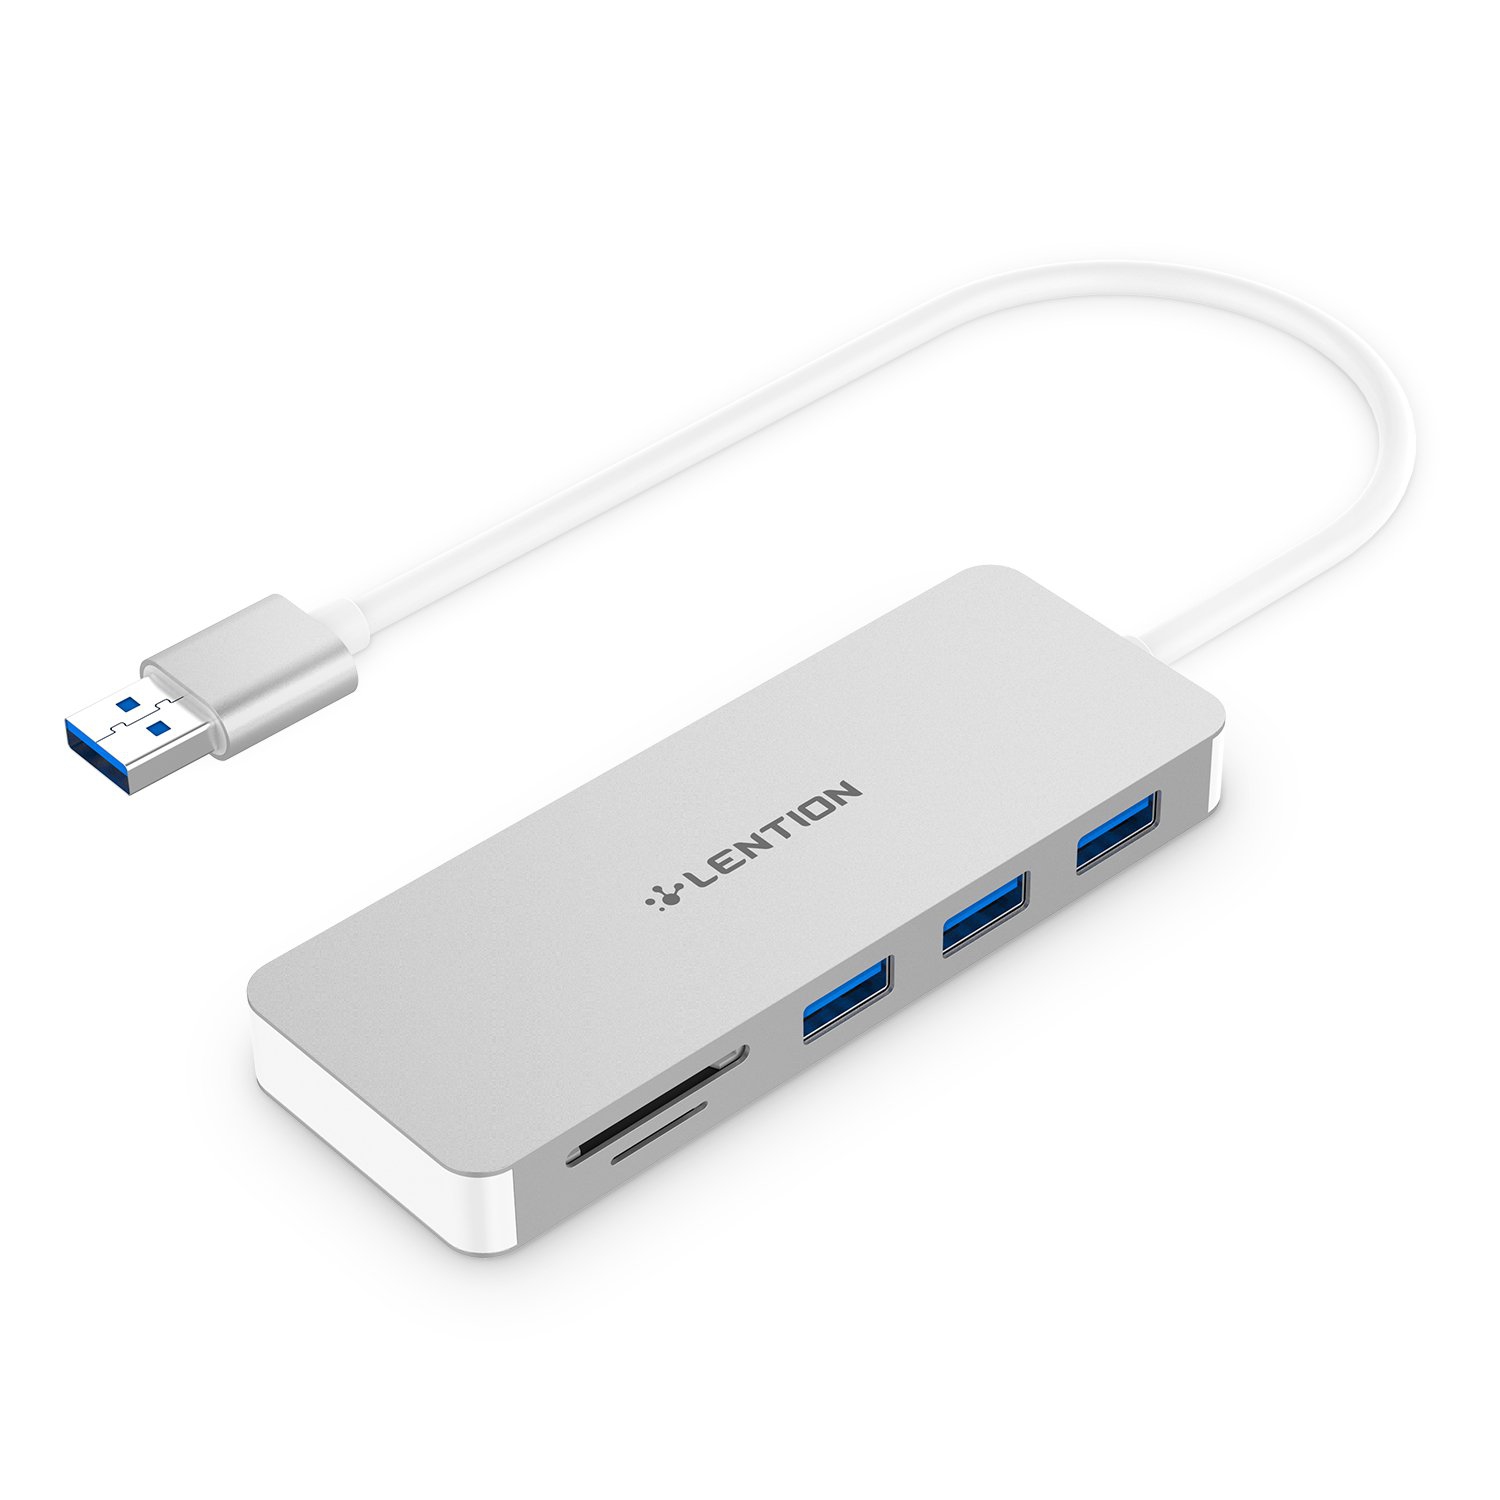 3-Port USB 3.0 Data Hub with SD/Micro SD Card Reader, Multiport USB Adapter Compatible for MacBook Air/Pro (Before 2016)